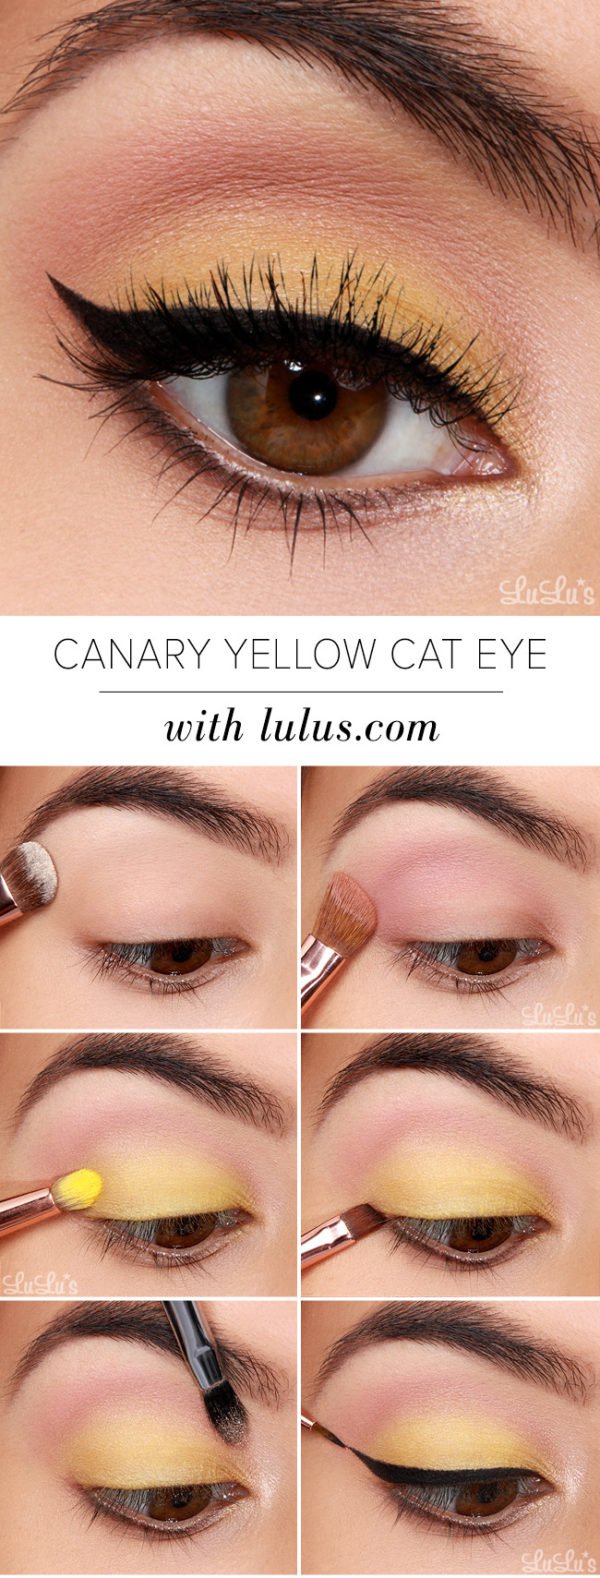 The Best Step By Step Tutorials For Perfect Smokey Eyes Make Up